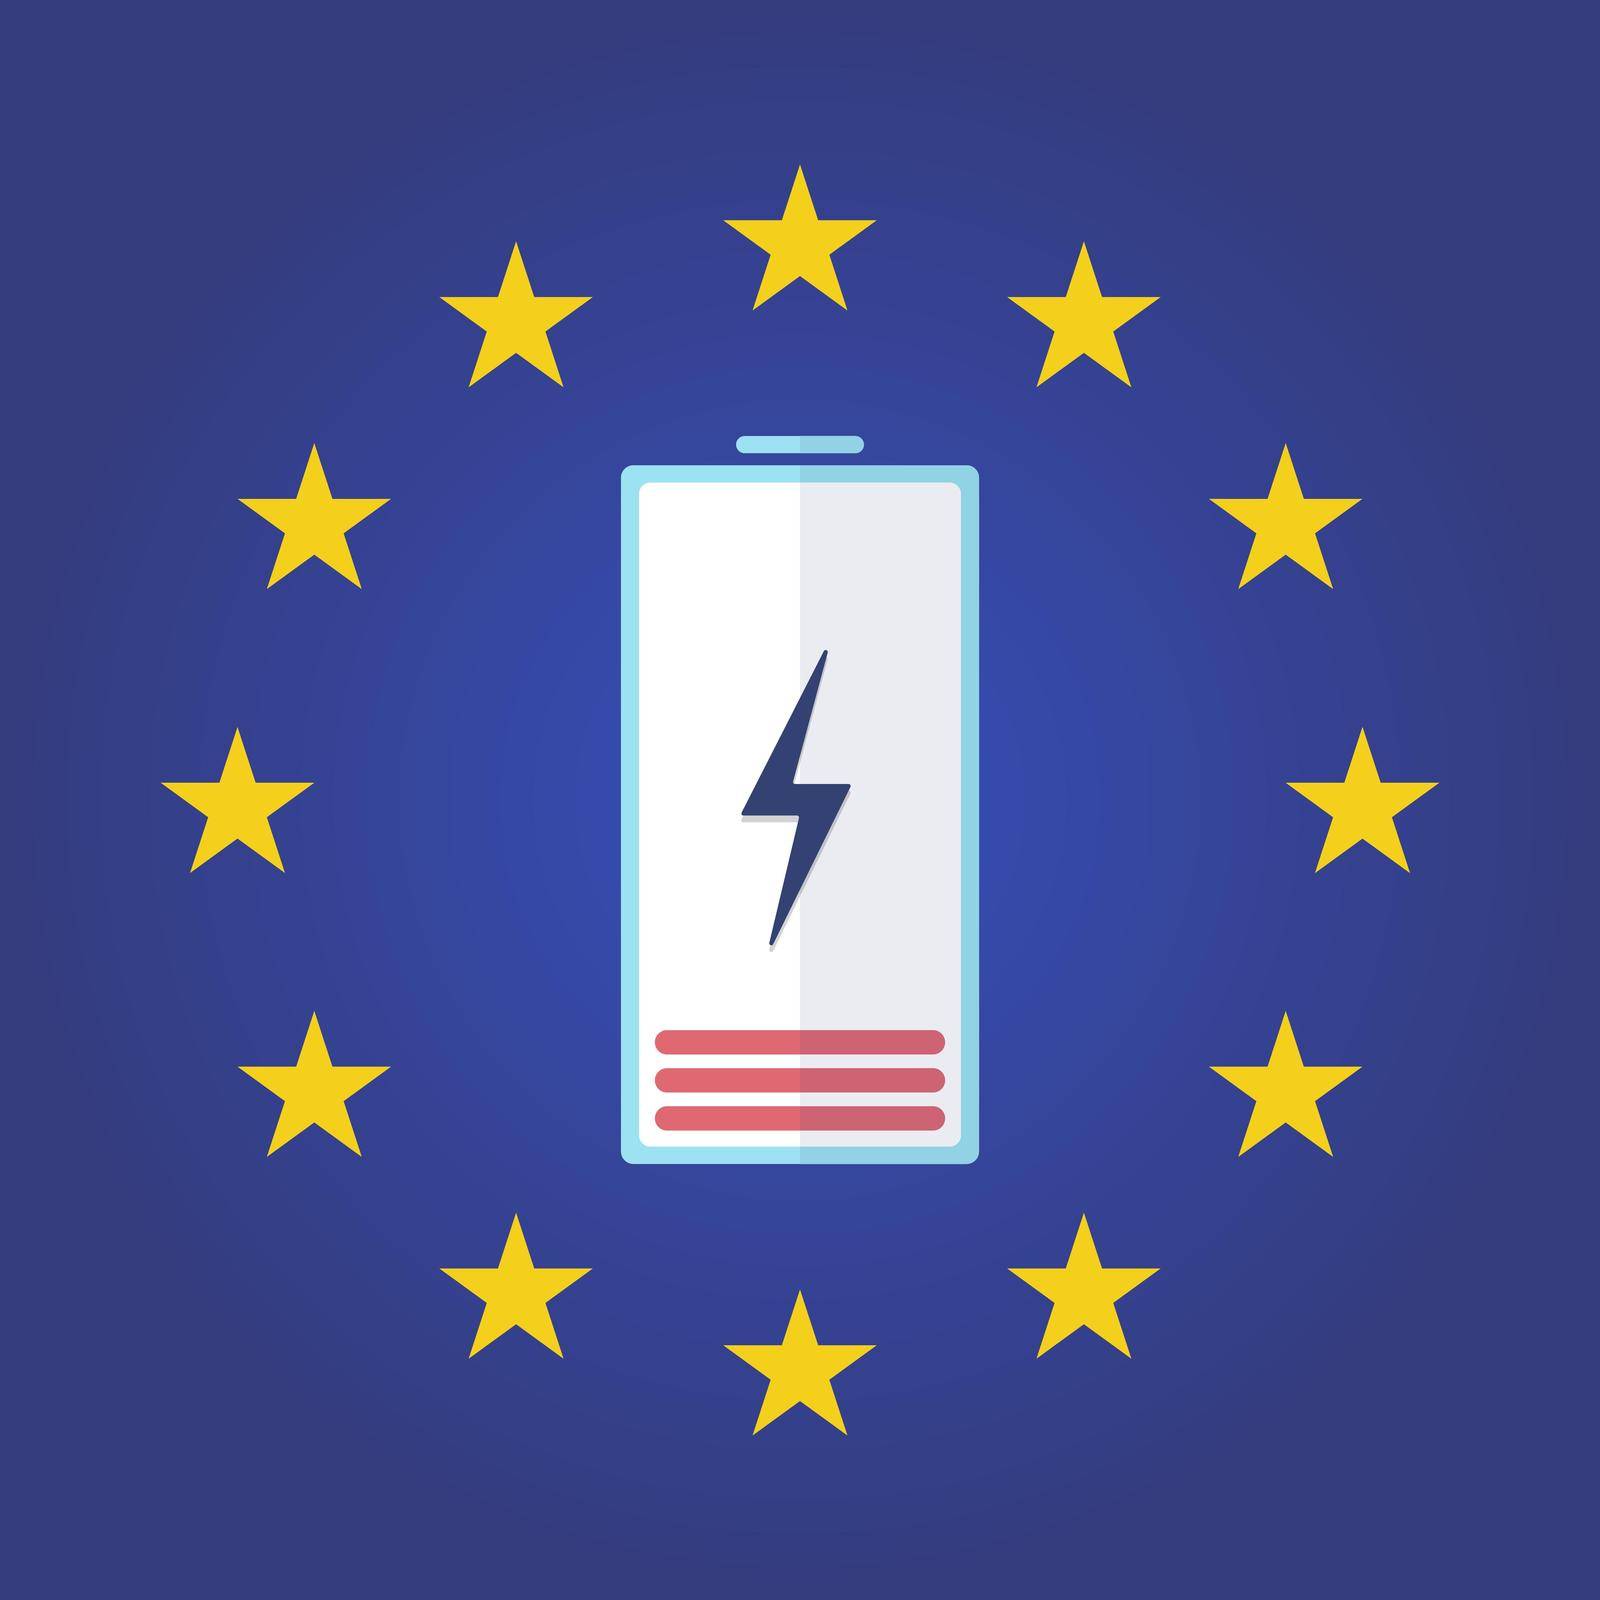 The concept of the energy crisis in Europe. A battery with a dead battery and a lightning bolt icon on it on a blue background with the stars of the European Union. Termination of the supply of resources from Russia